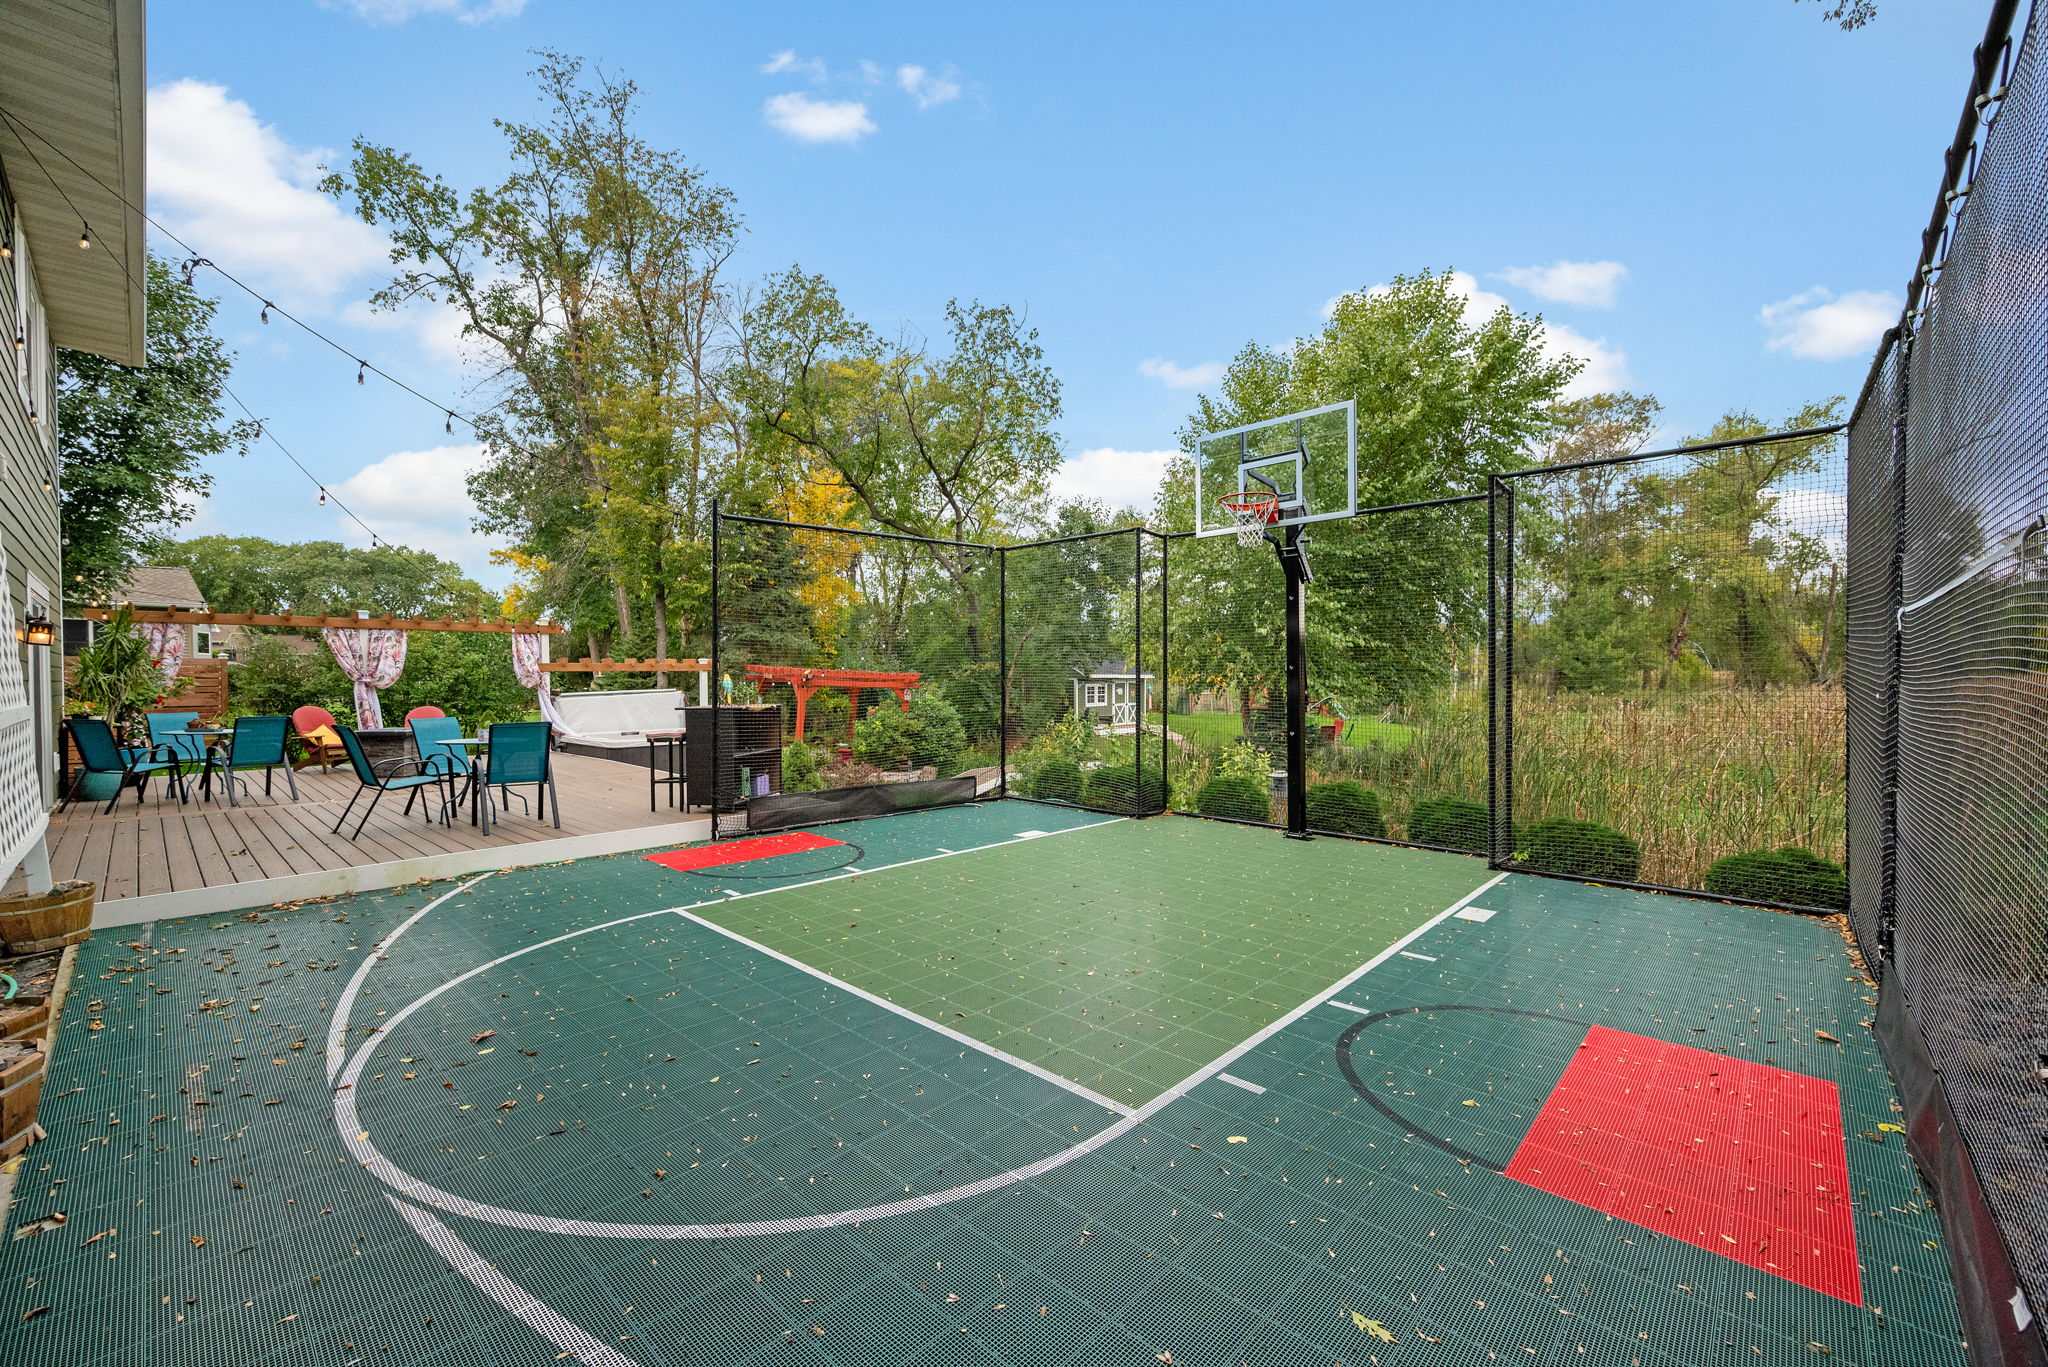 Enjoy endless hours of activity on the 24' x 25' sport court.